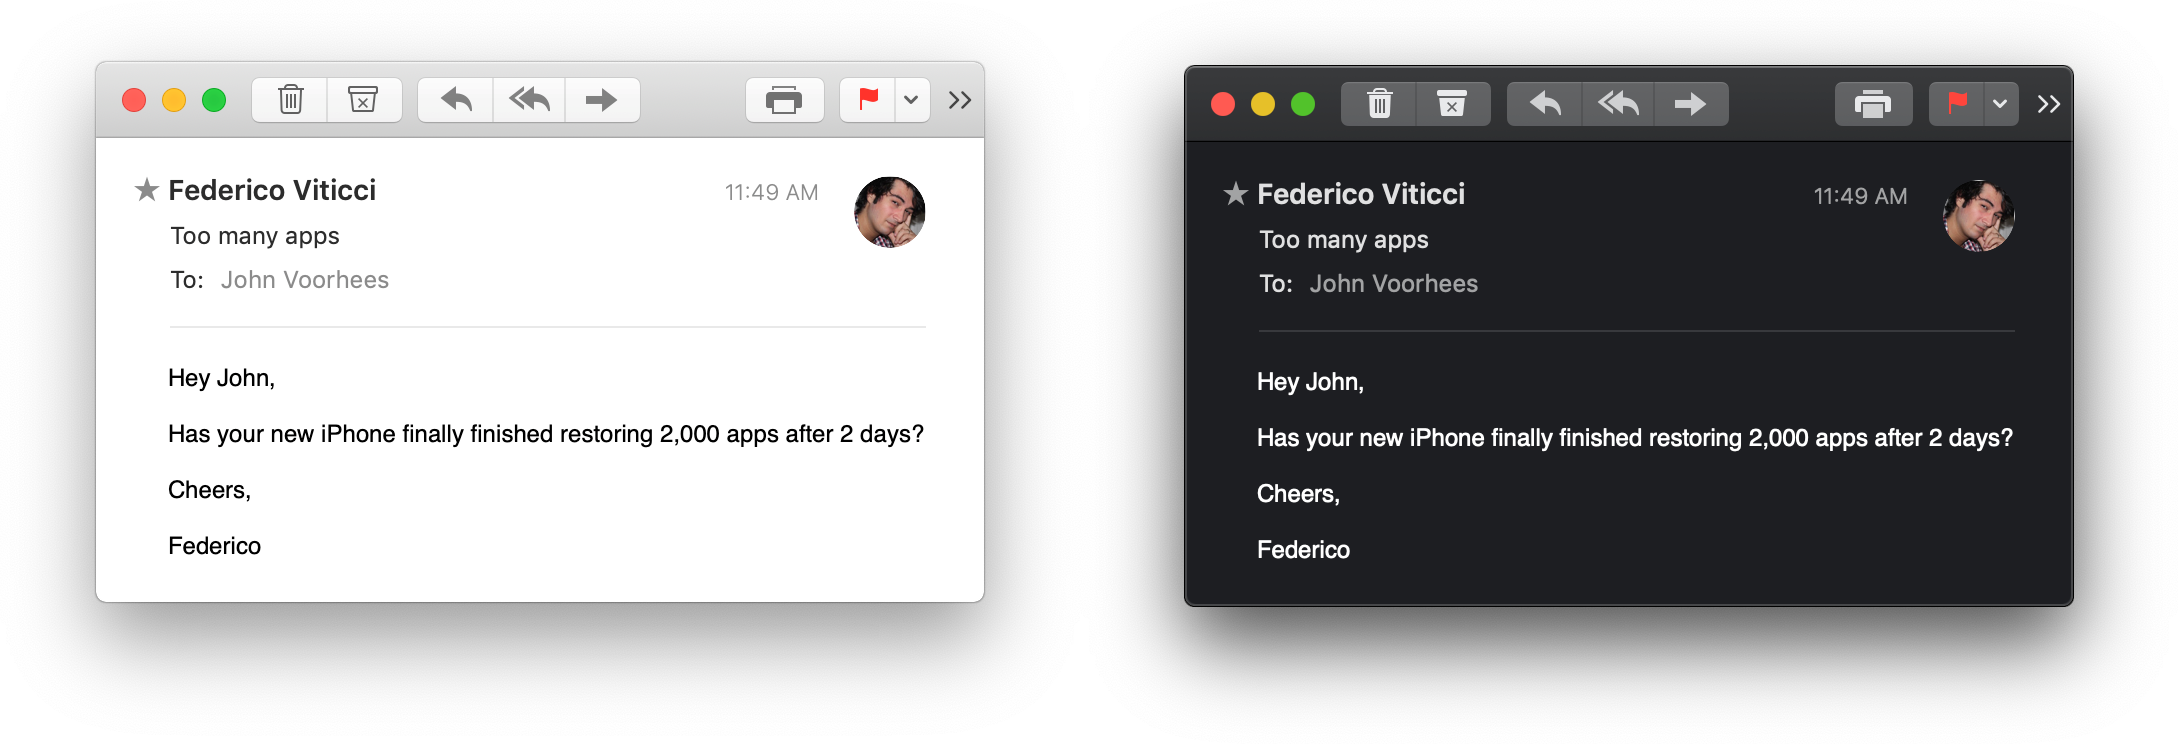 Apple Mail lets users turn on Dark Mode for message windows.